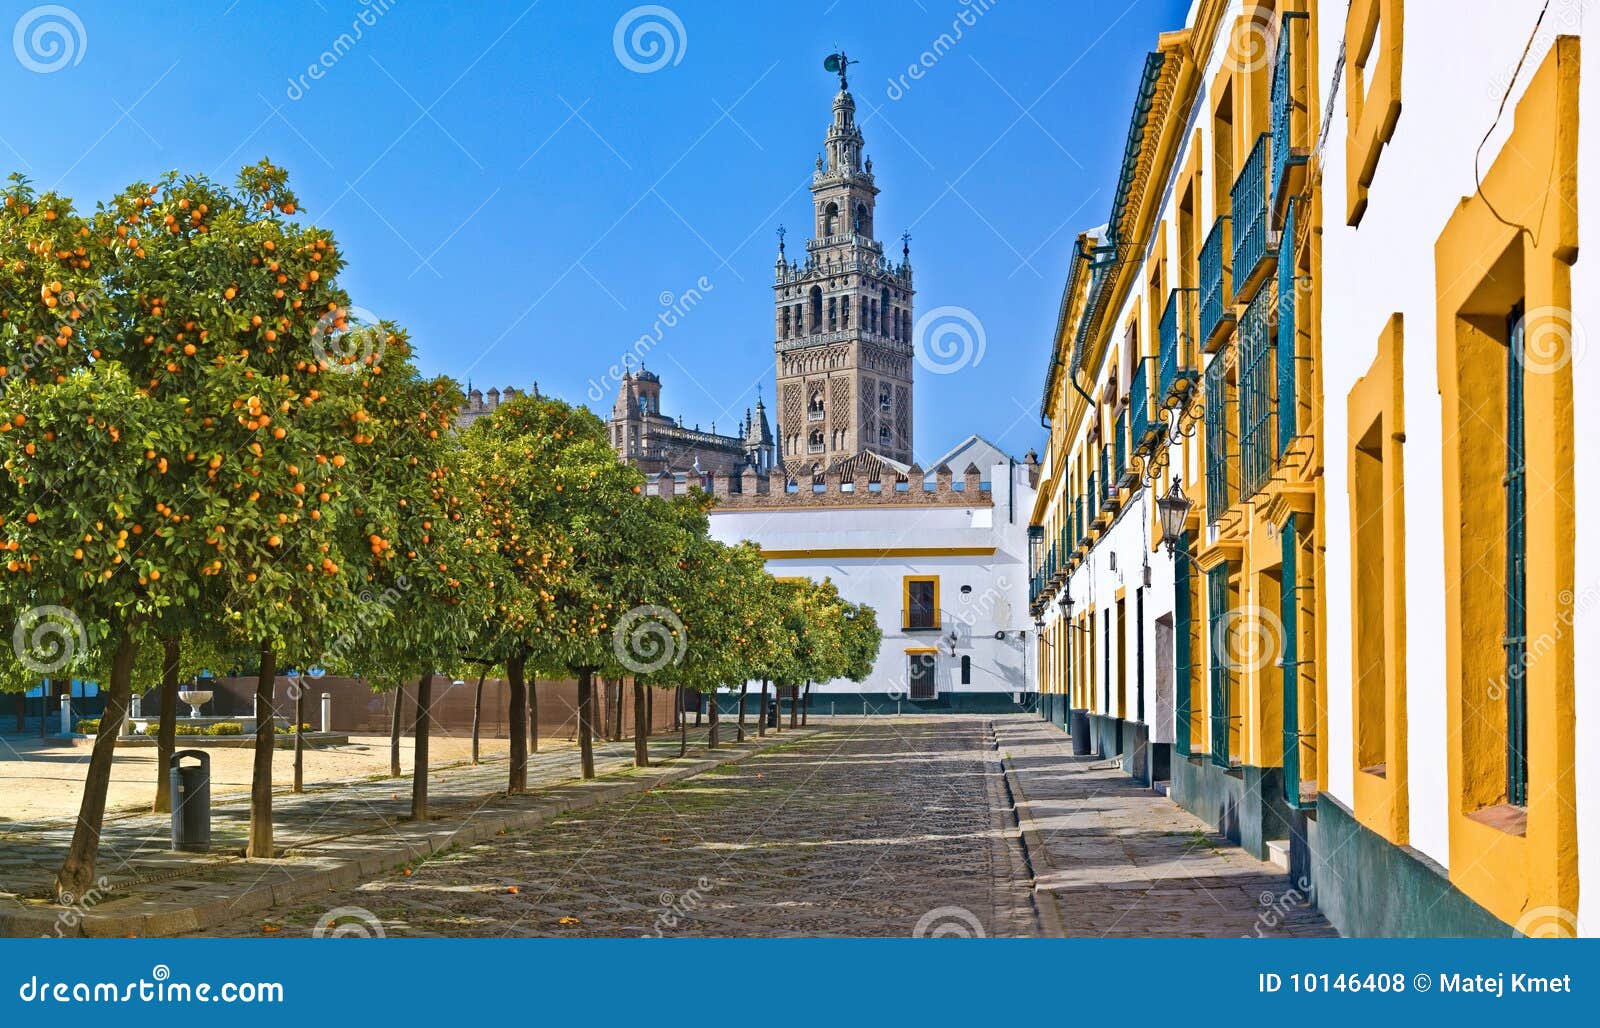 the cathedral of seville